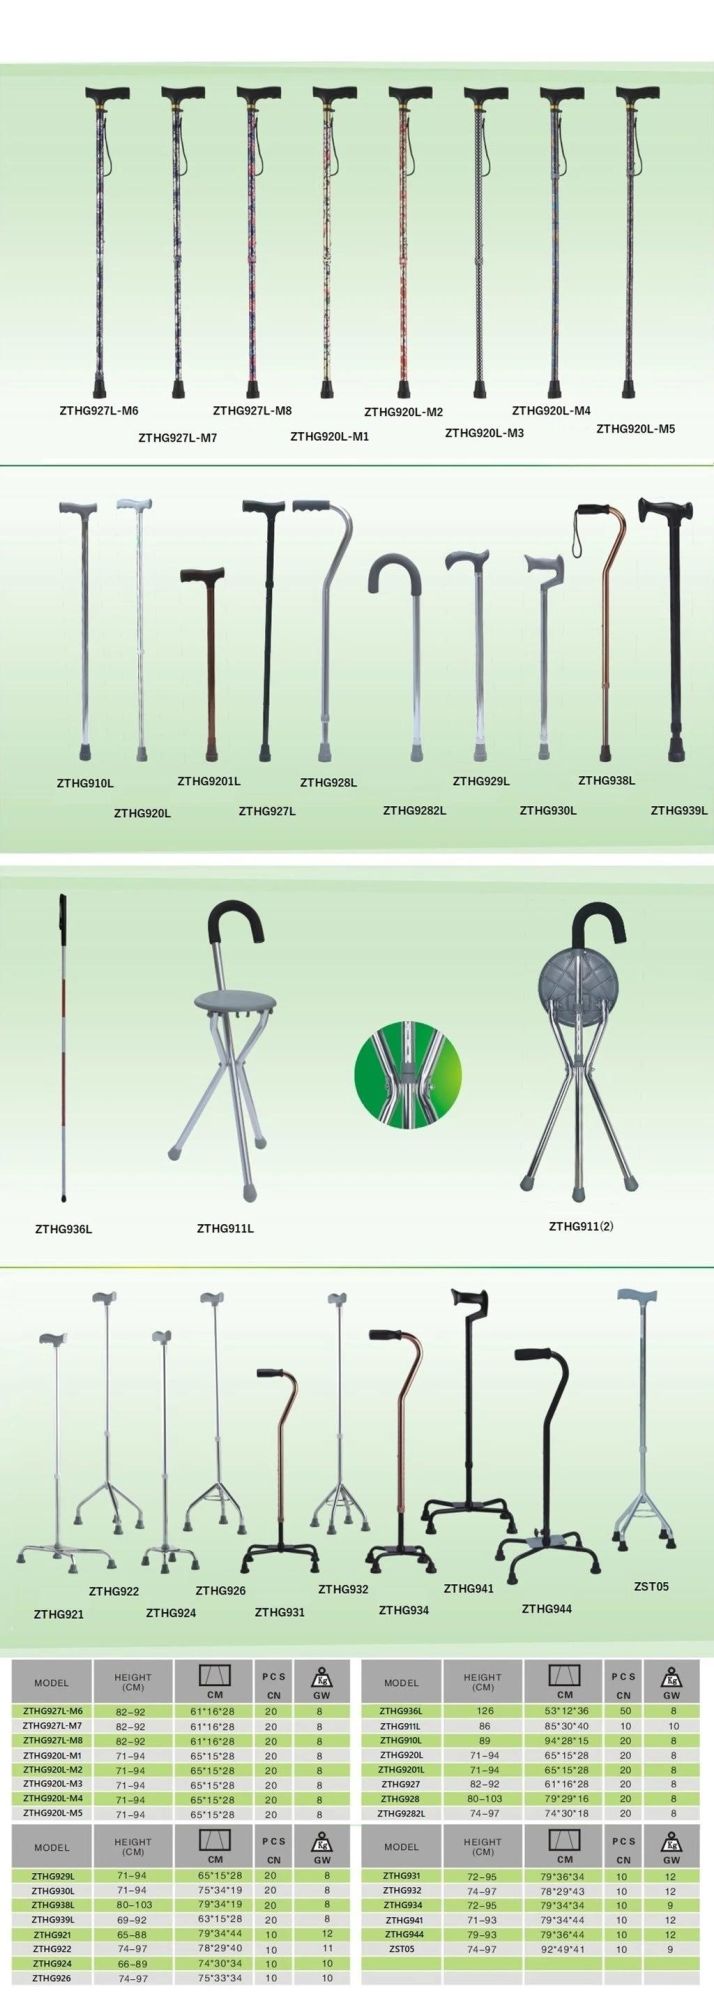 Foldable Scalable Folding Crutch Straight Single Antiskid Portable Disabled/Elderly People Safety Outdoor Lightweight Steel Easy Carry Walking Cane